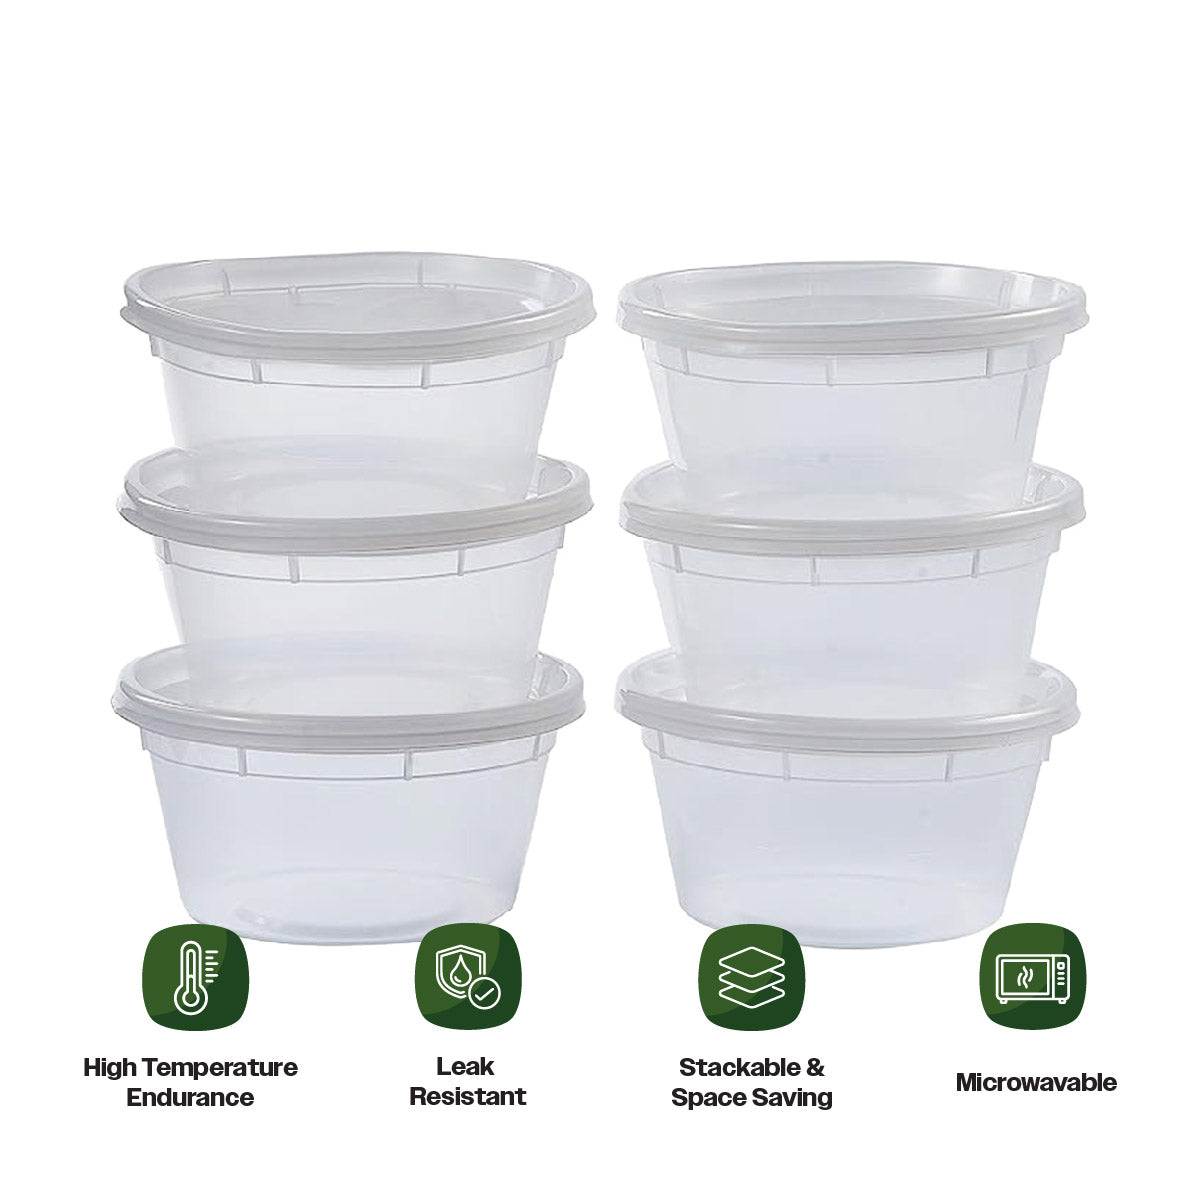 CIAO! 12OZ Injection Molded Soup-Deli Container with Lid, (240/240 combo pack)